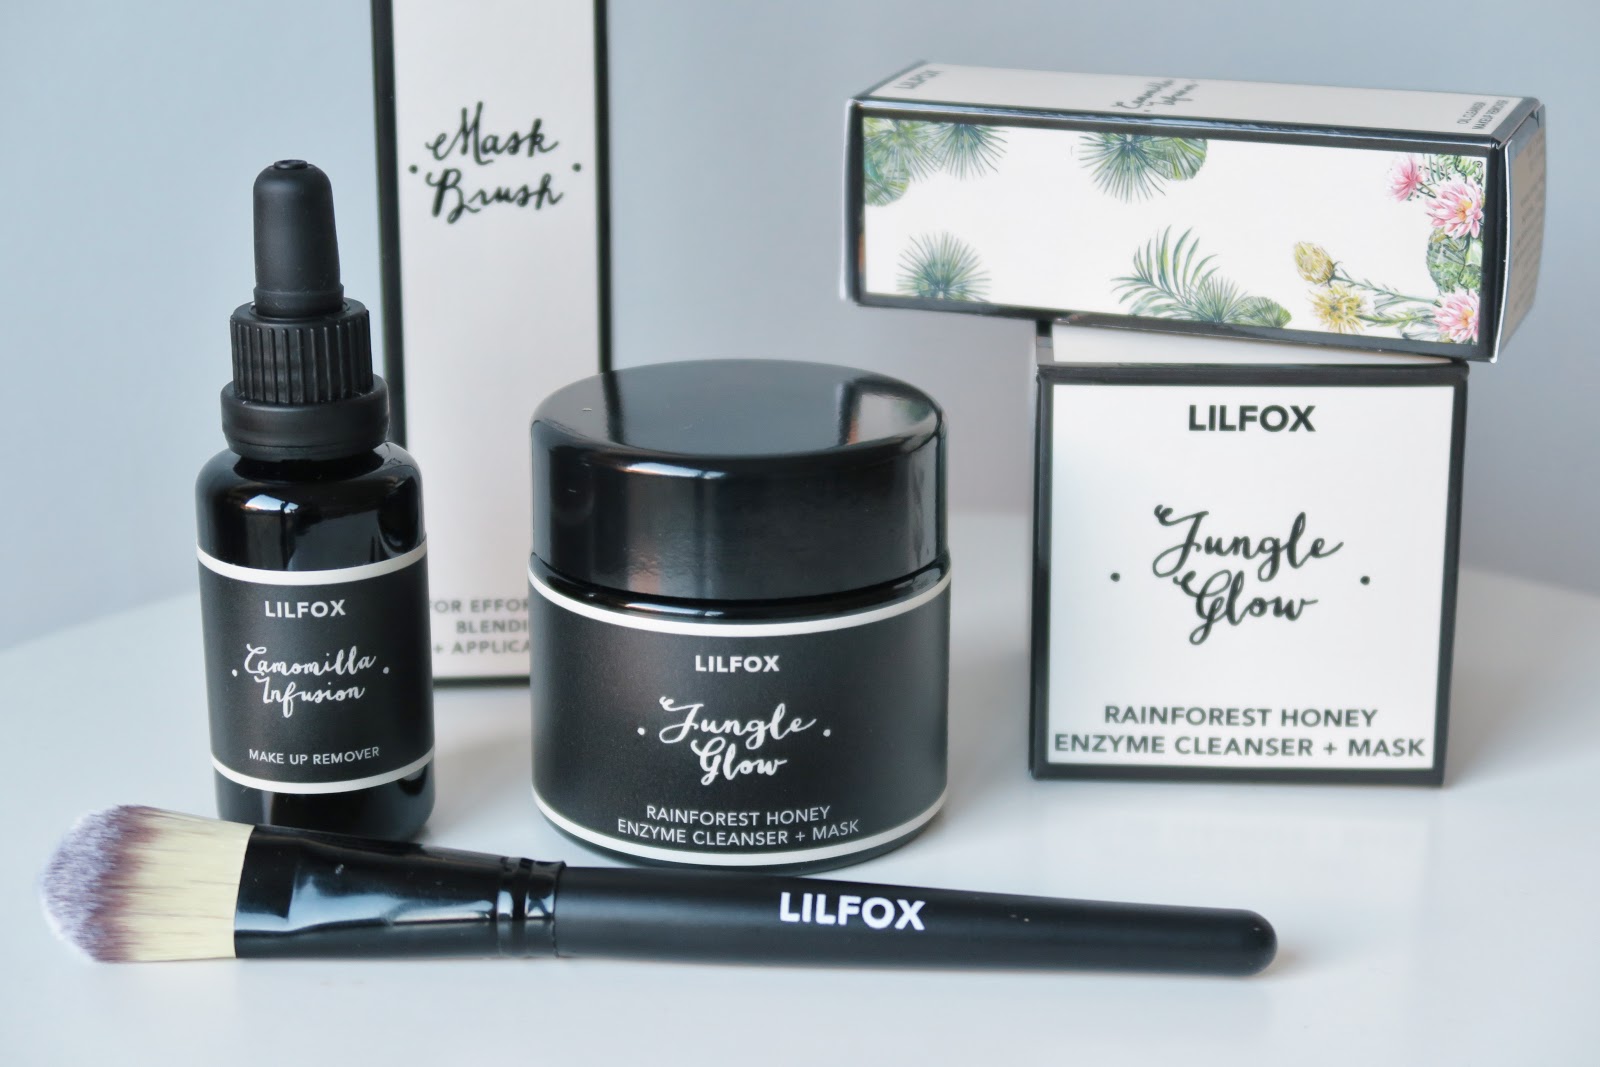 Winter Luxuries, new releases at abeautifulworld | Luxury online natural and organic performance skincare